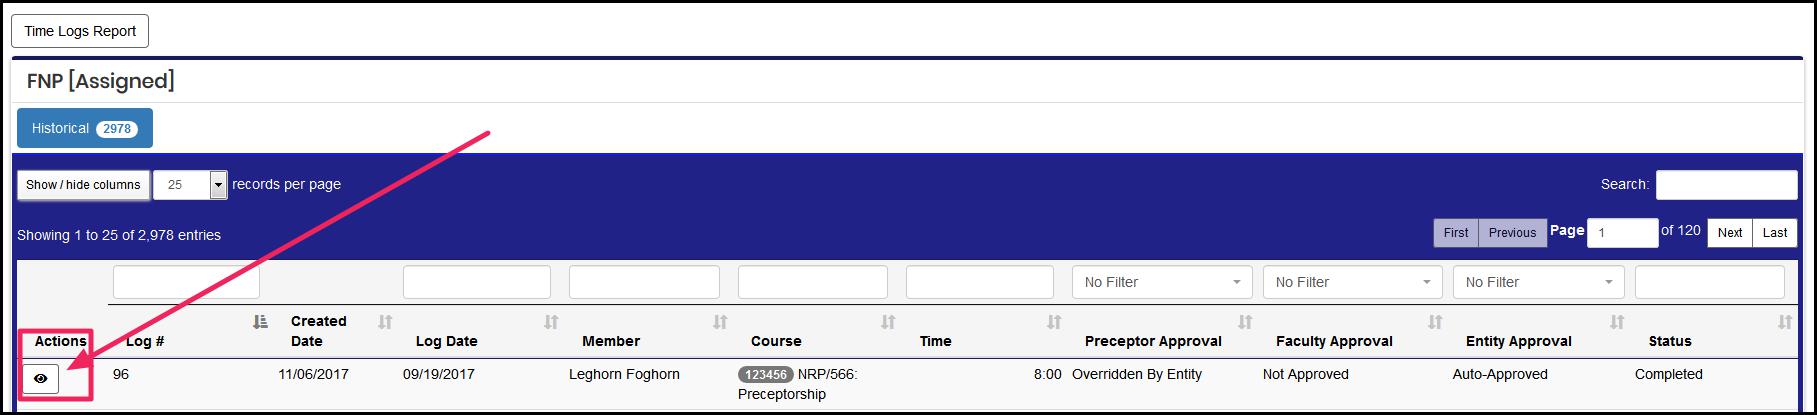 Image pointing to eye icon under Actions column on Time Logs page from faculty view